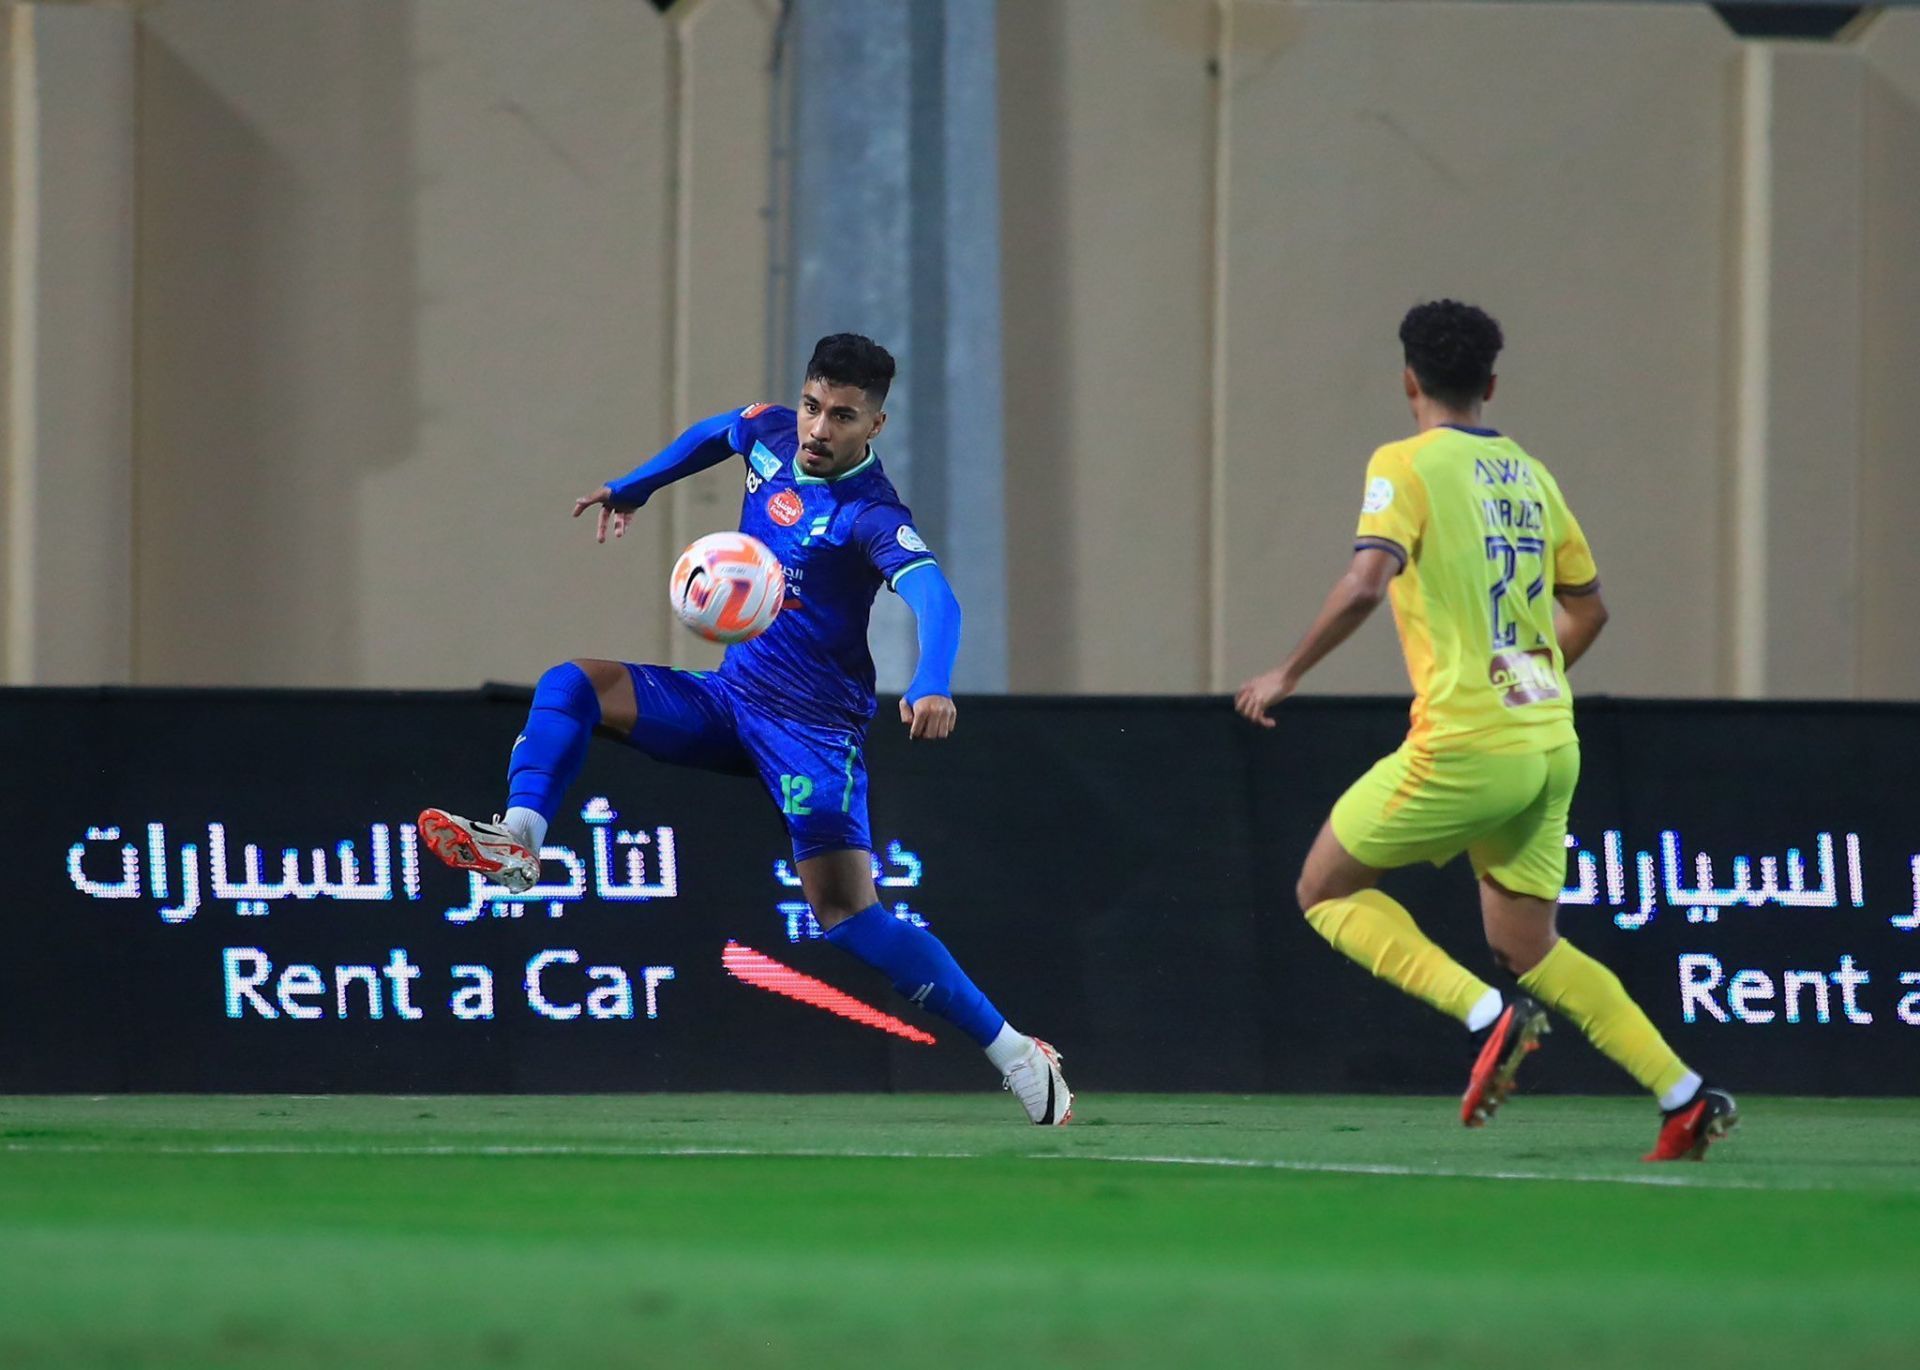 Al-Fateh are winless in their last three clashes with Al-Shabab 